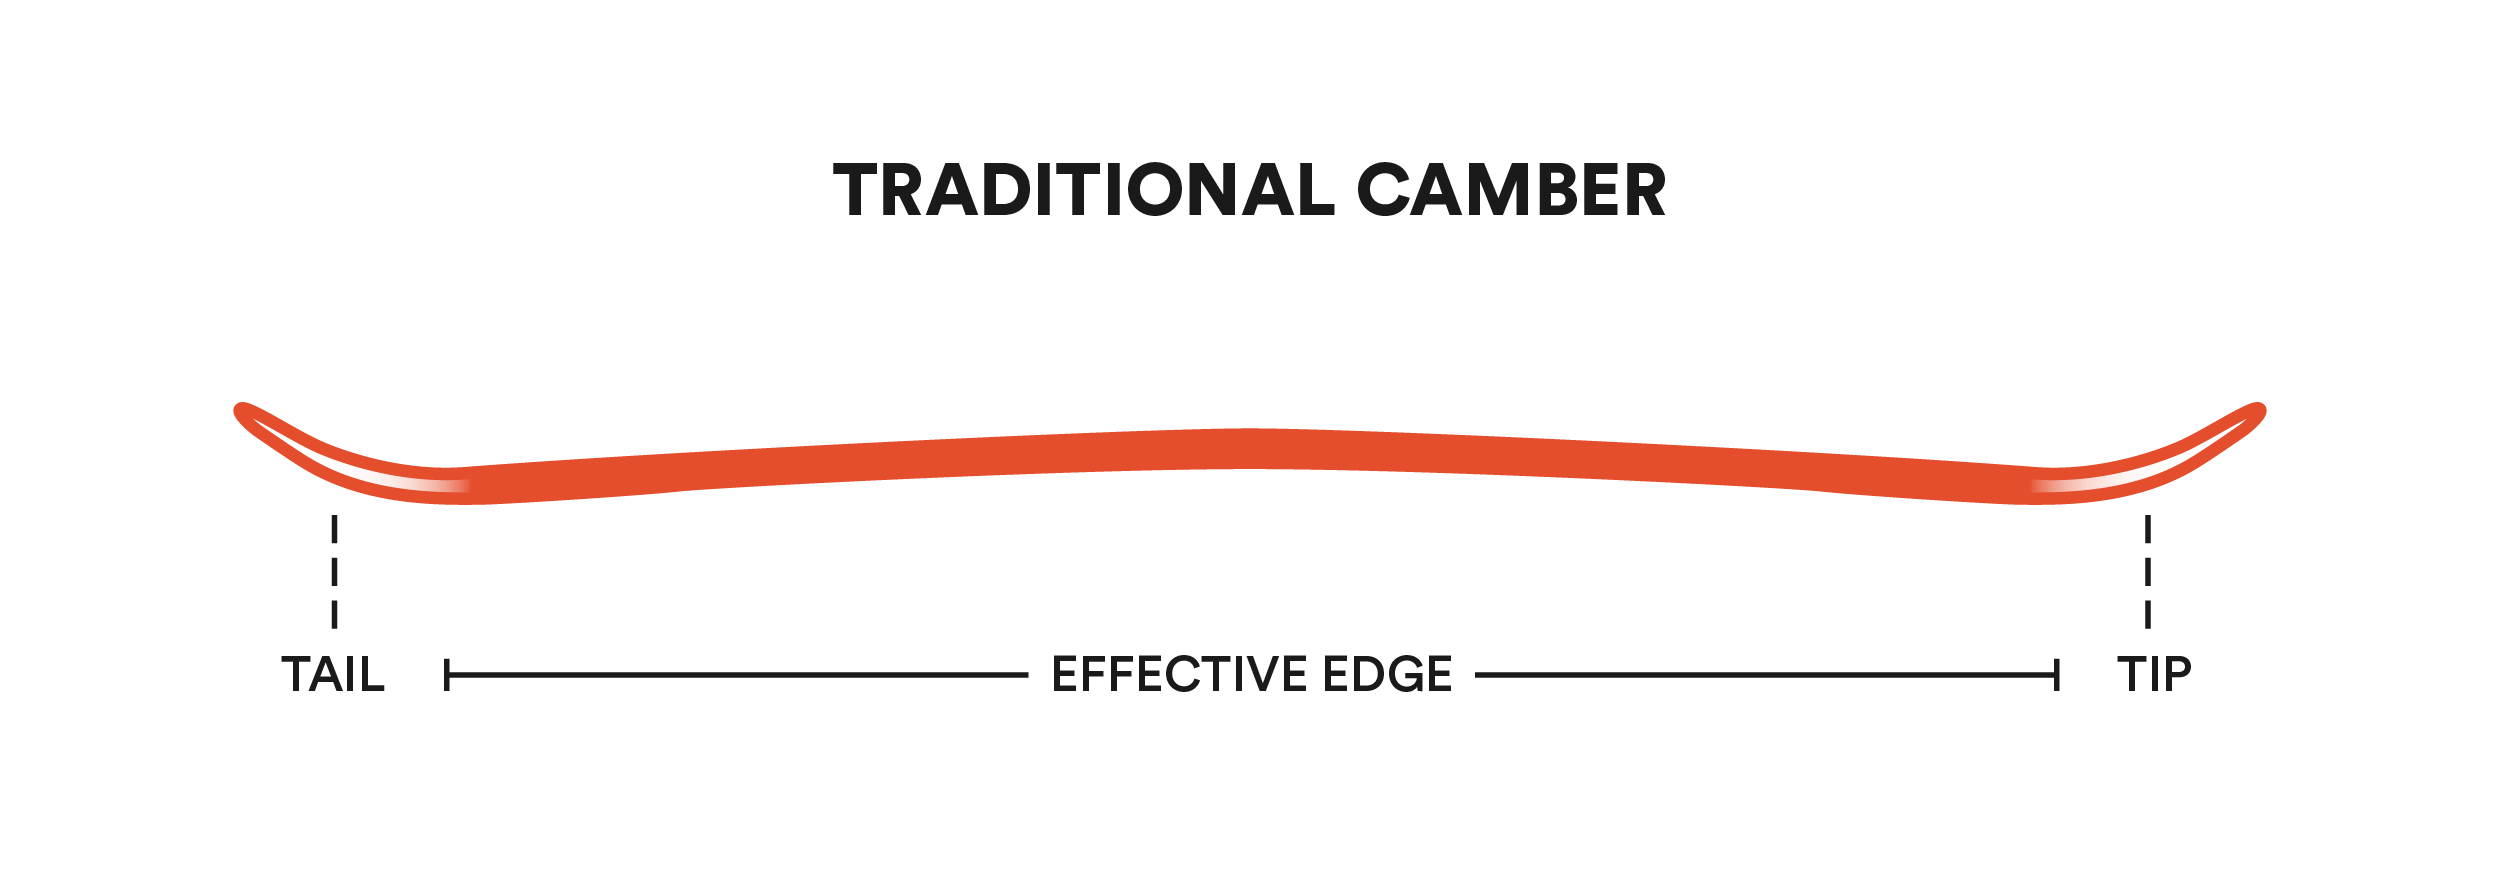 Graphic showing traditional camber (gentle rainbow shape with the ends curved upwards)